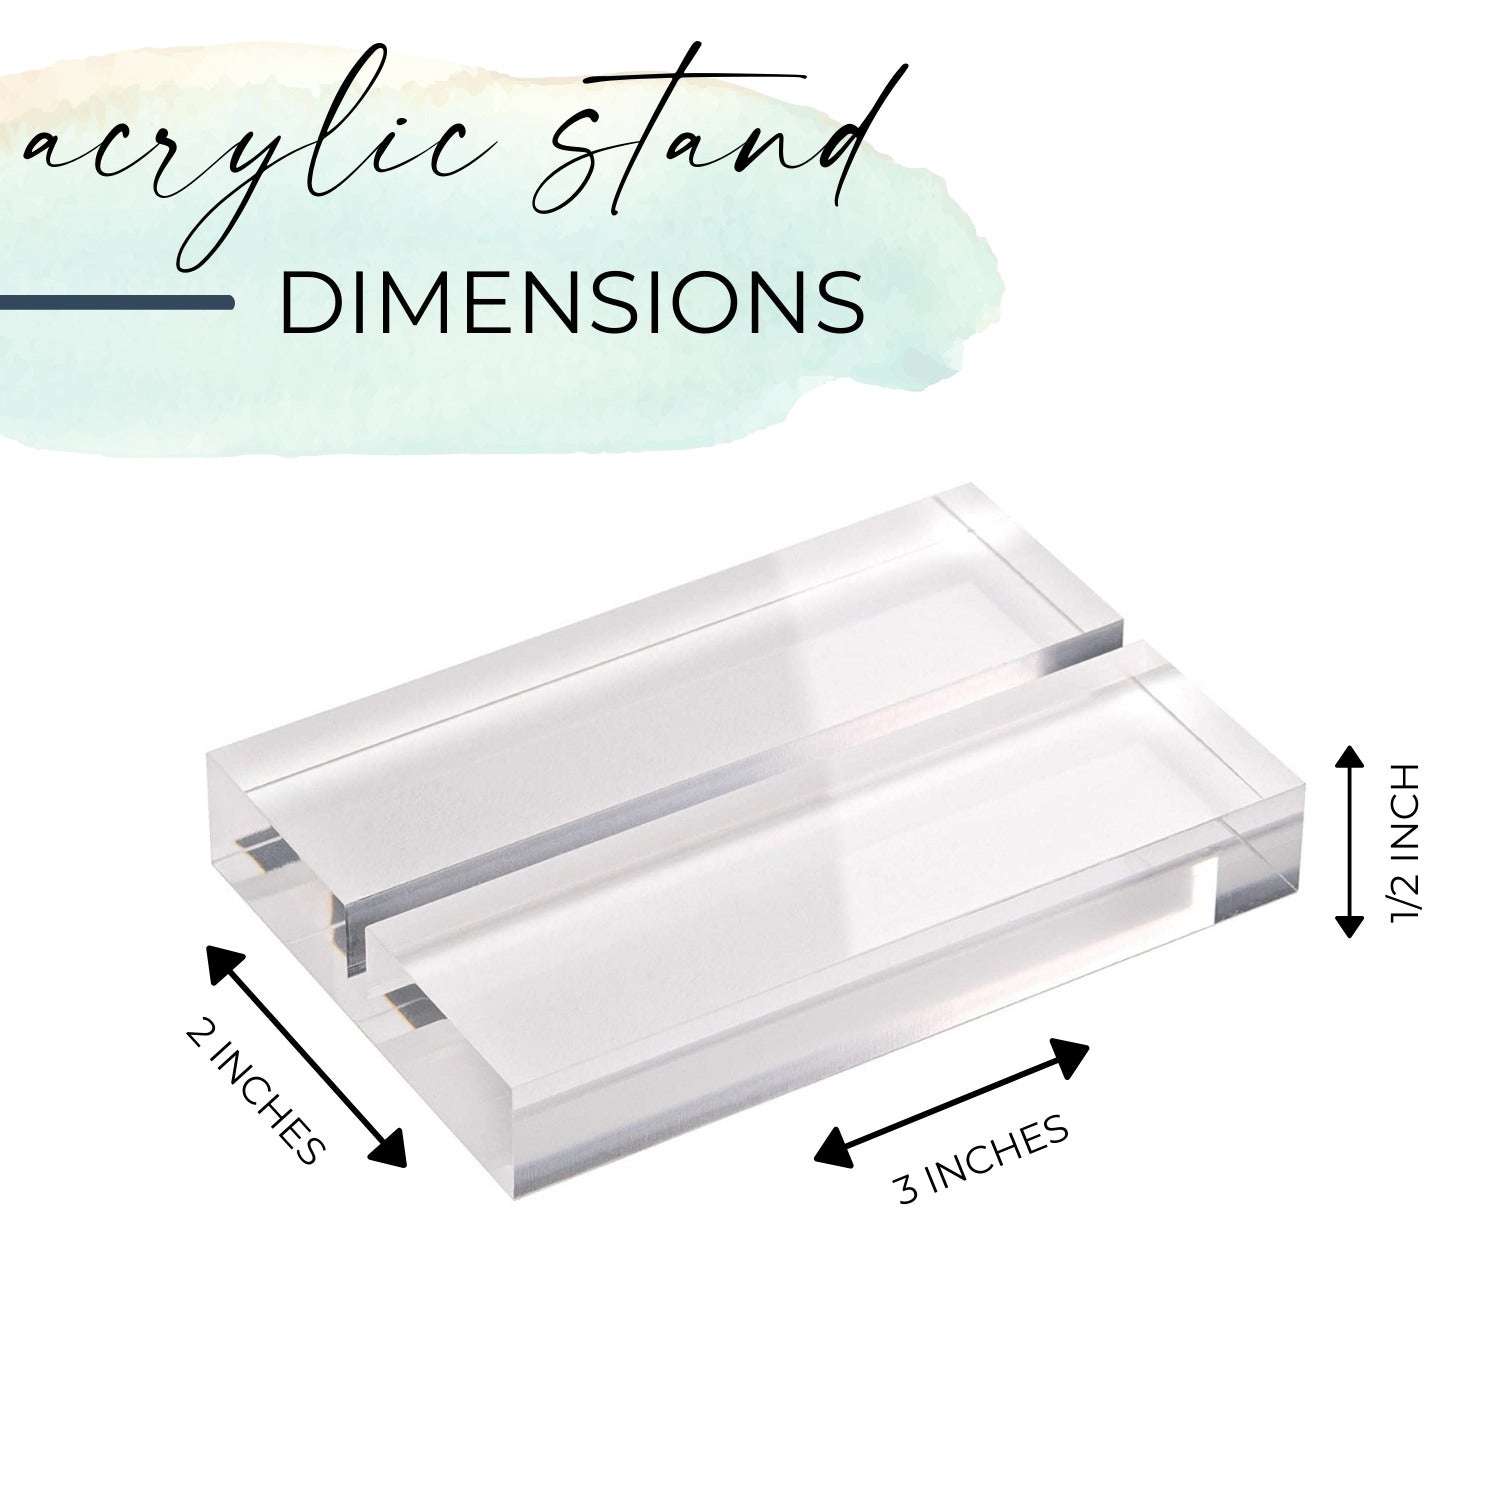 Table Number Holders | Wood Stands and Acrylic Stand Table Number Holders for Lucite Acrylic Clear Glass Look Acrylics | Table Numbers - SCC Signs